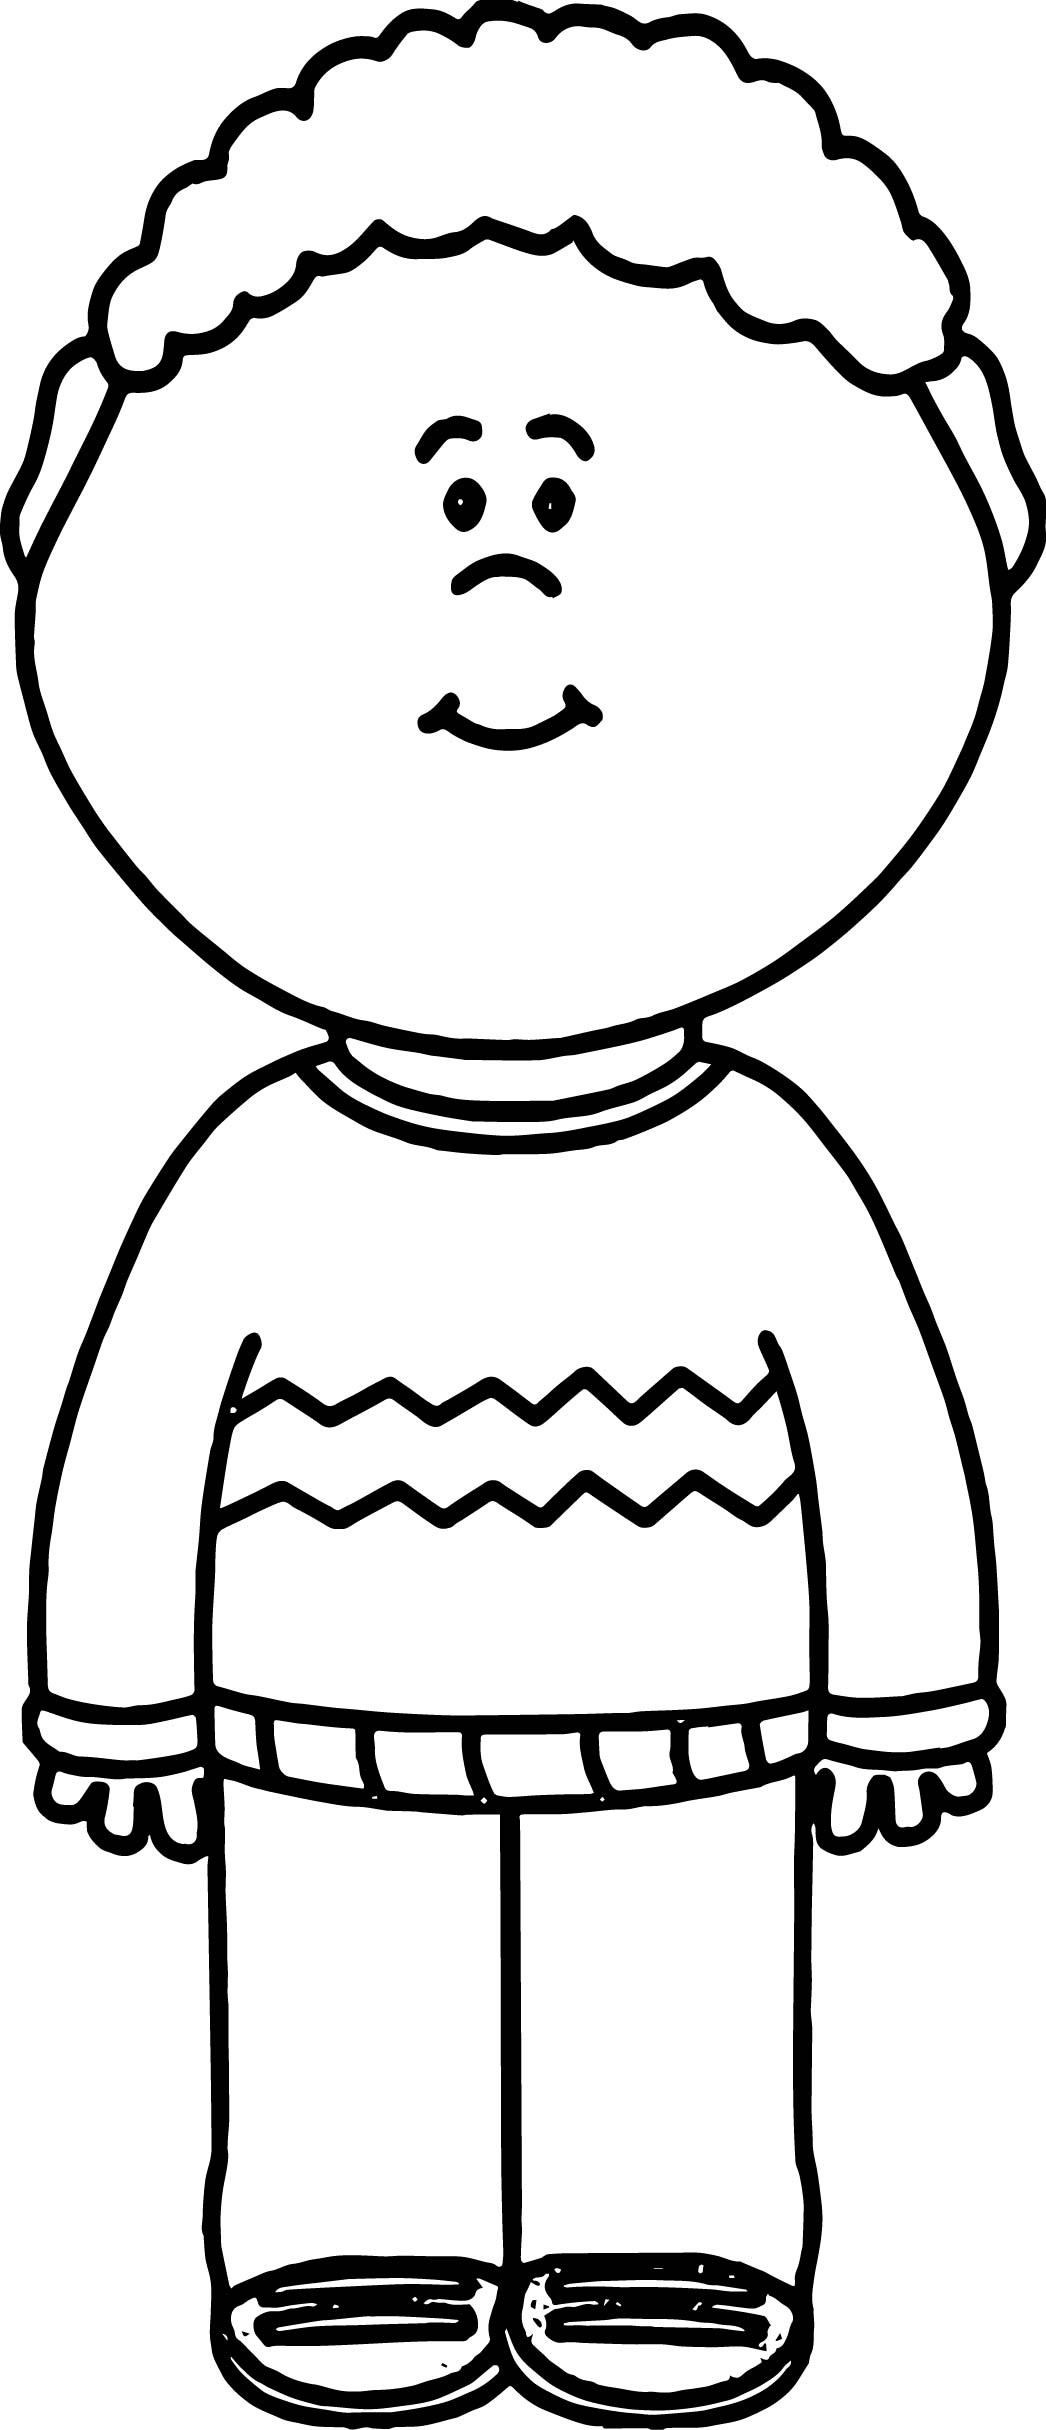 Coloring Sheets Boys
 Boy Coloring Pages